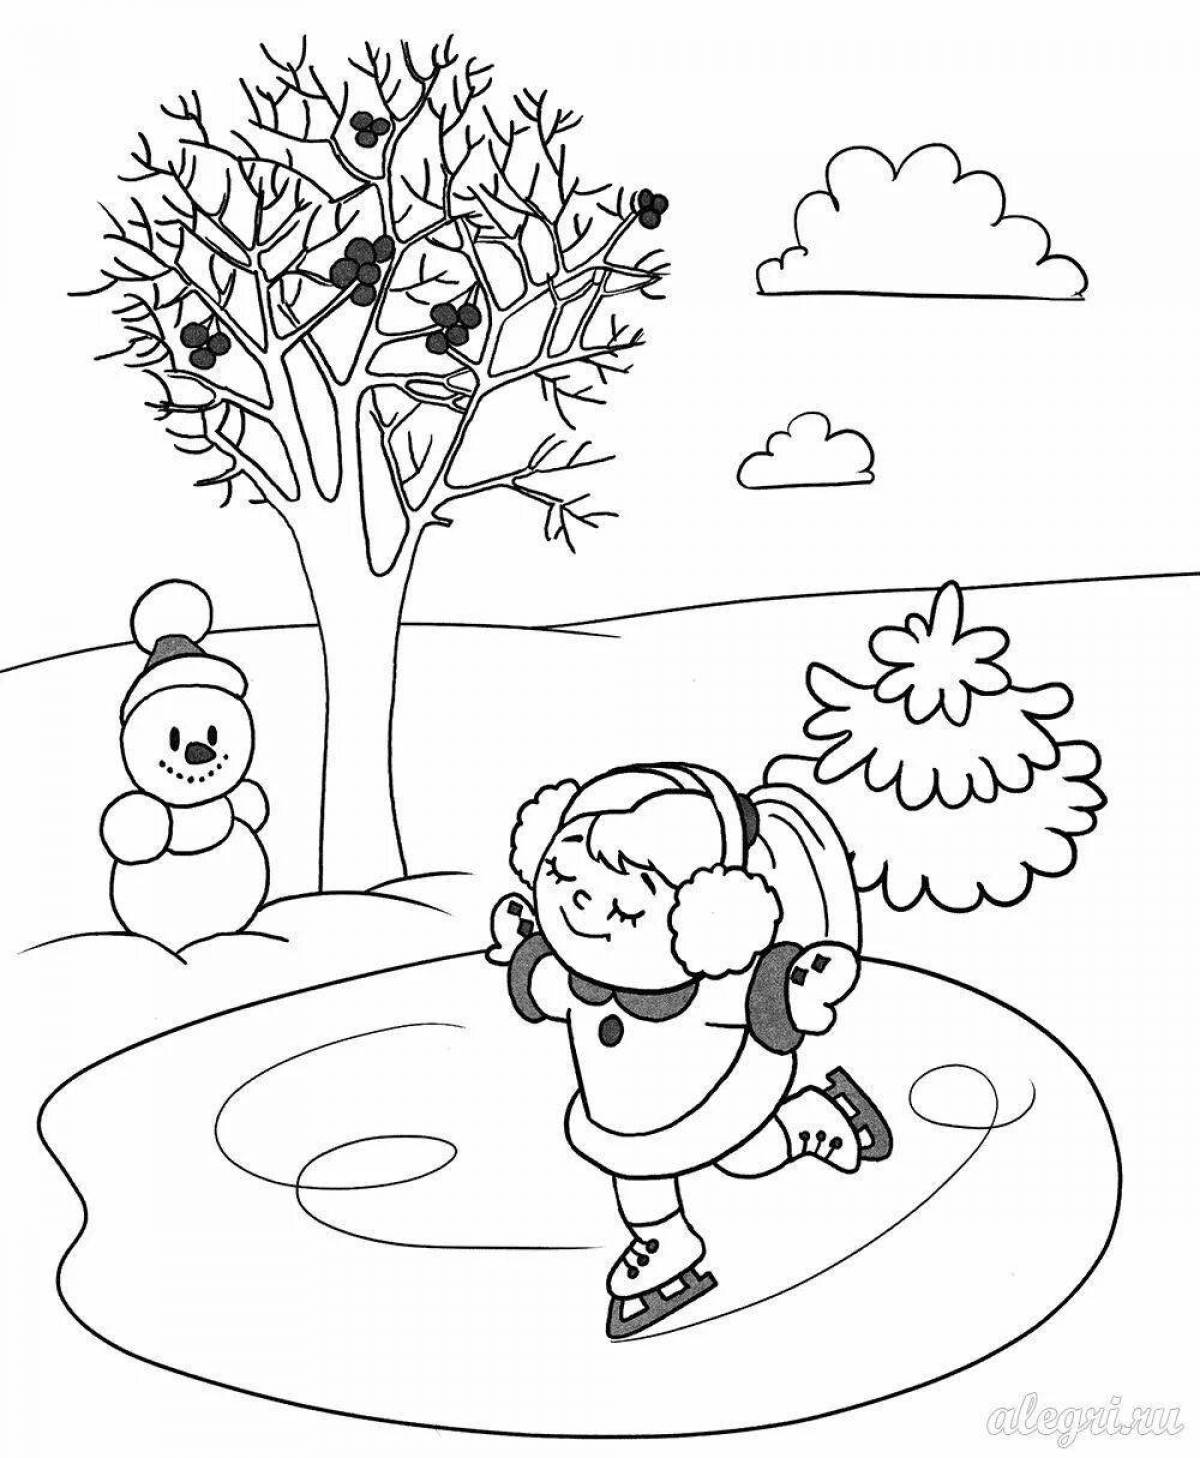 Blooming summer coloring page